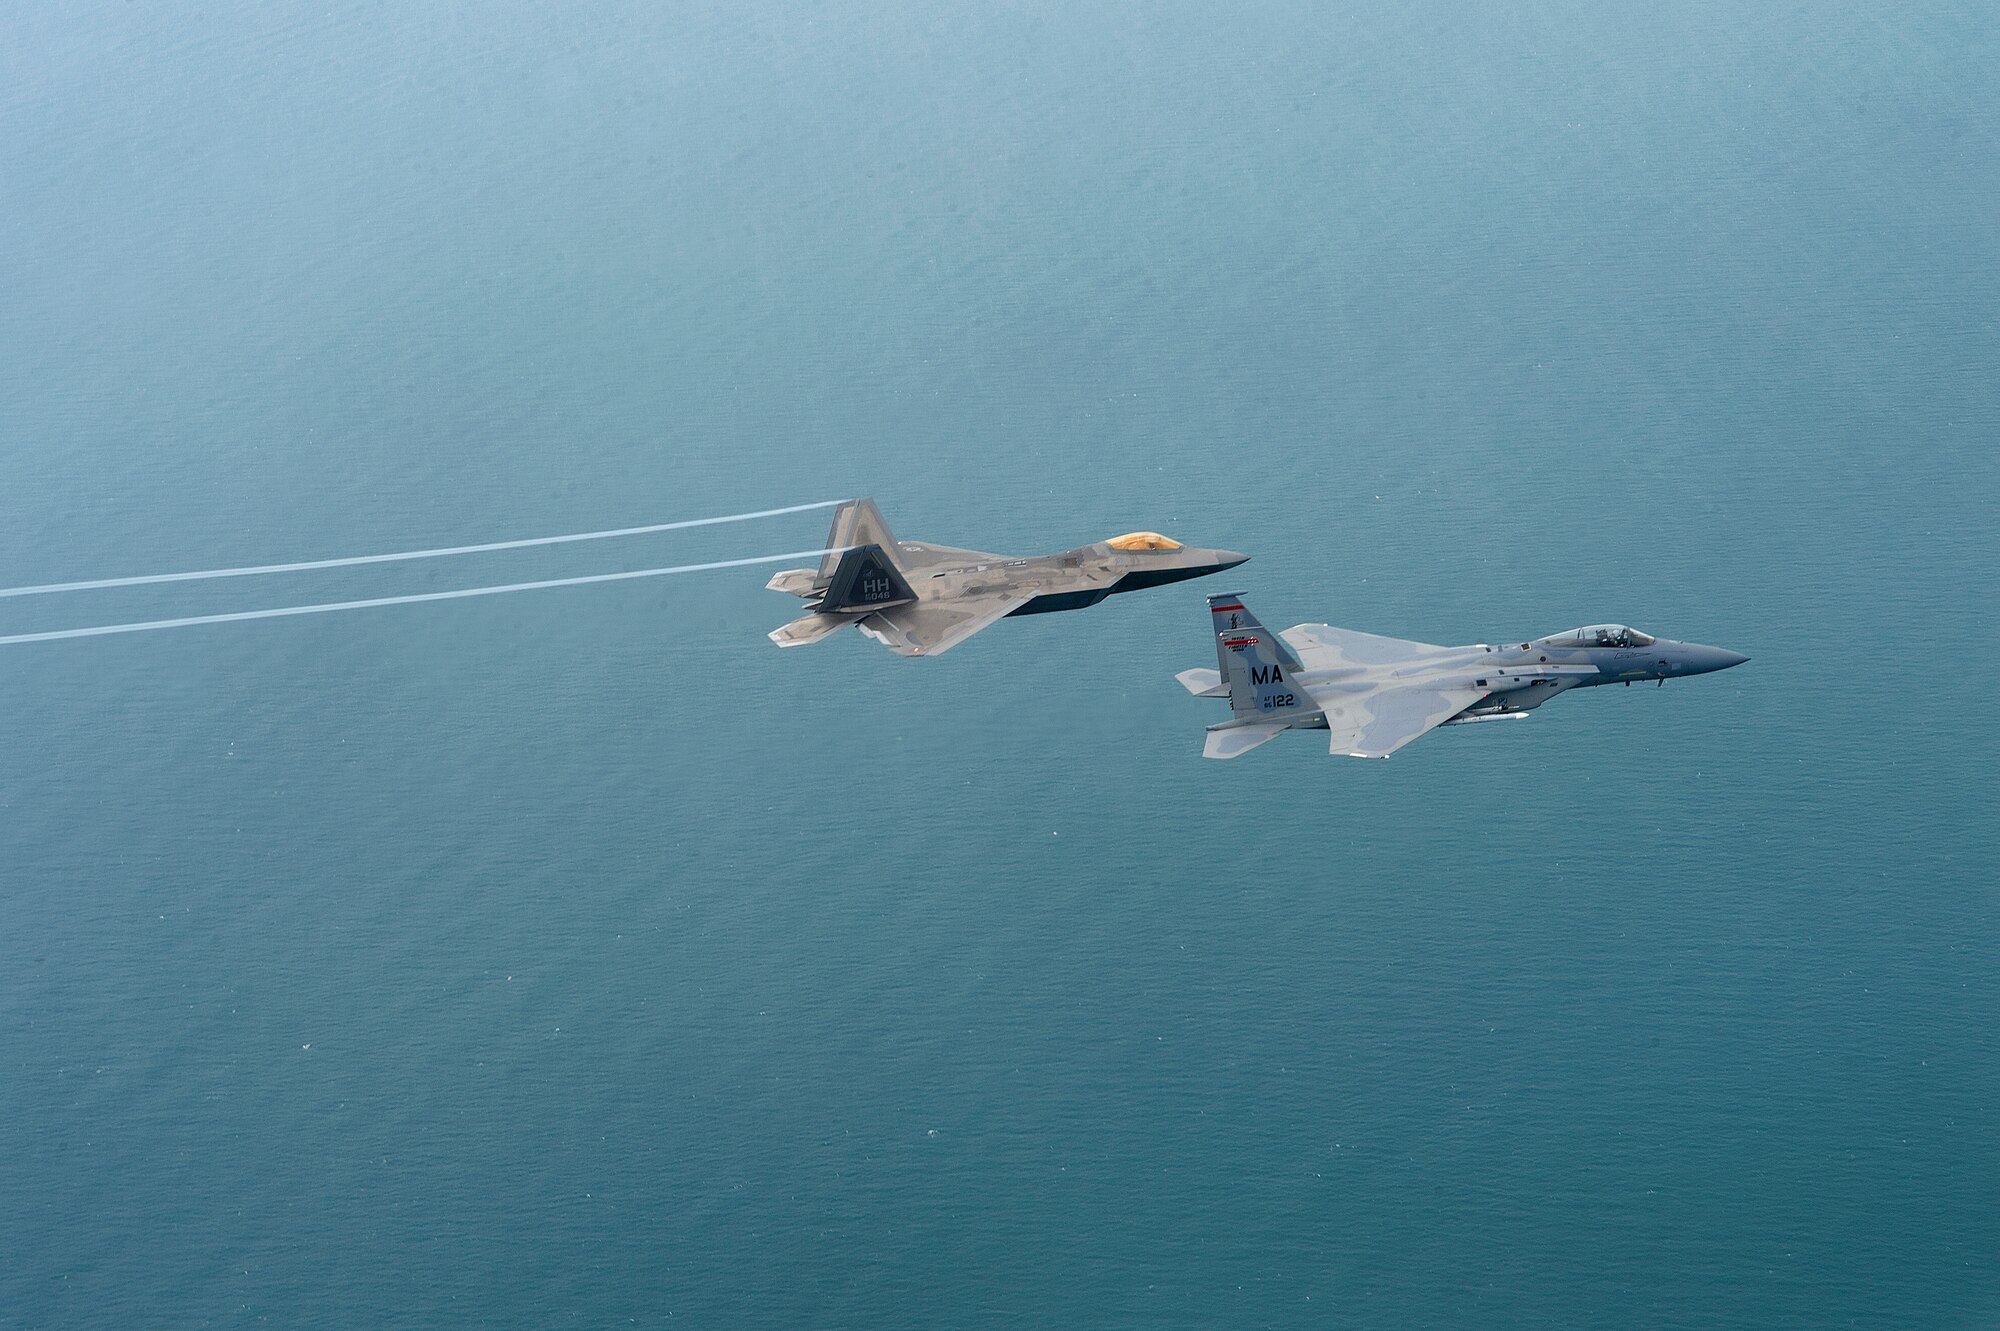 A U.S. Air Force F-22 Raptor from the 154th Wing, Joint Base Pearl Harbor-Hickam, Hawaii, and U.S. Air Force F-15 Eagle from the 131st Fighter Squadron, 104th Fighter Wing, Barnes Air National Guard Base, Mass., fly over Penang, Malaysia, during Cope Taufan 14, June 16, 2014. Cope Taufan is a biennial large force employment exercise taking place June 9 to 20 designed to improve U.S. and Malaysian combined readiness. (U.S. Air Force photo by Tech. Sgt. Jason Robertson/Released)